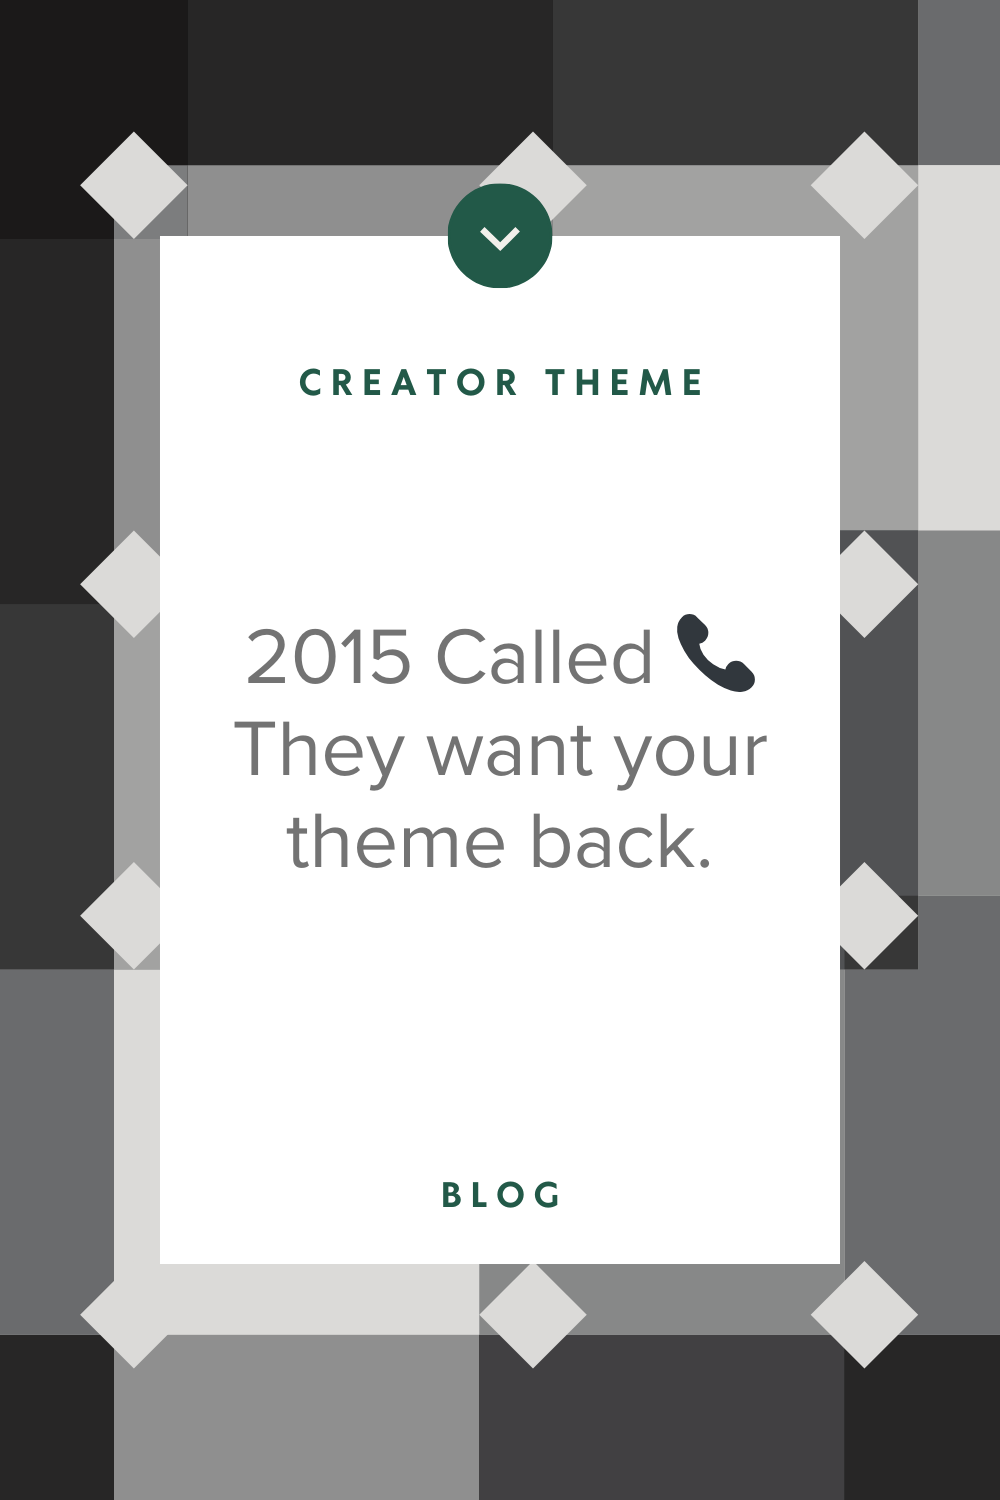 2015 called ☎️: They want your theme back.